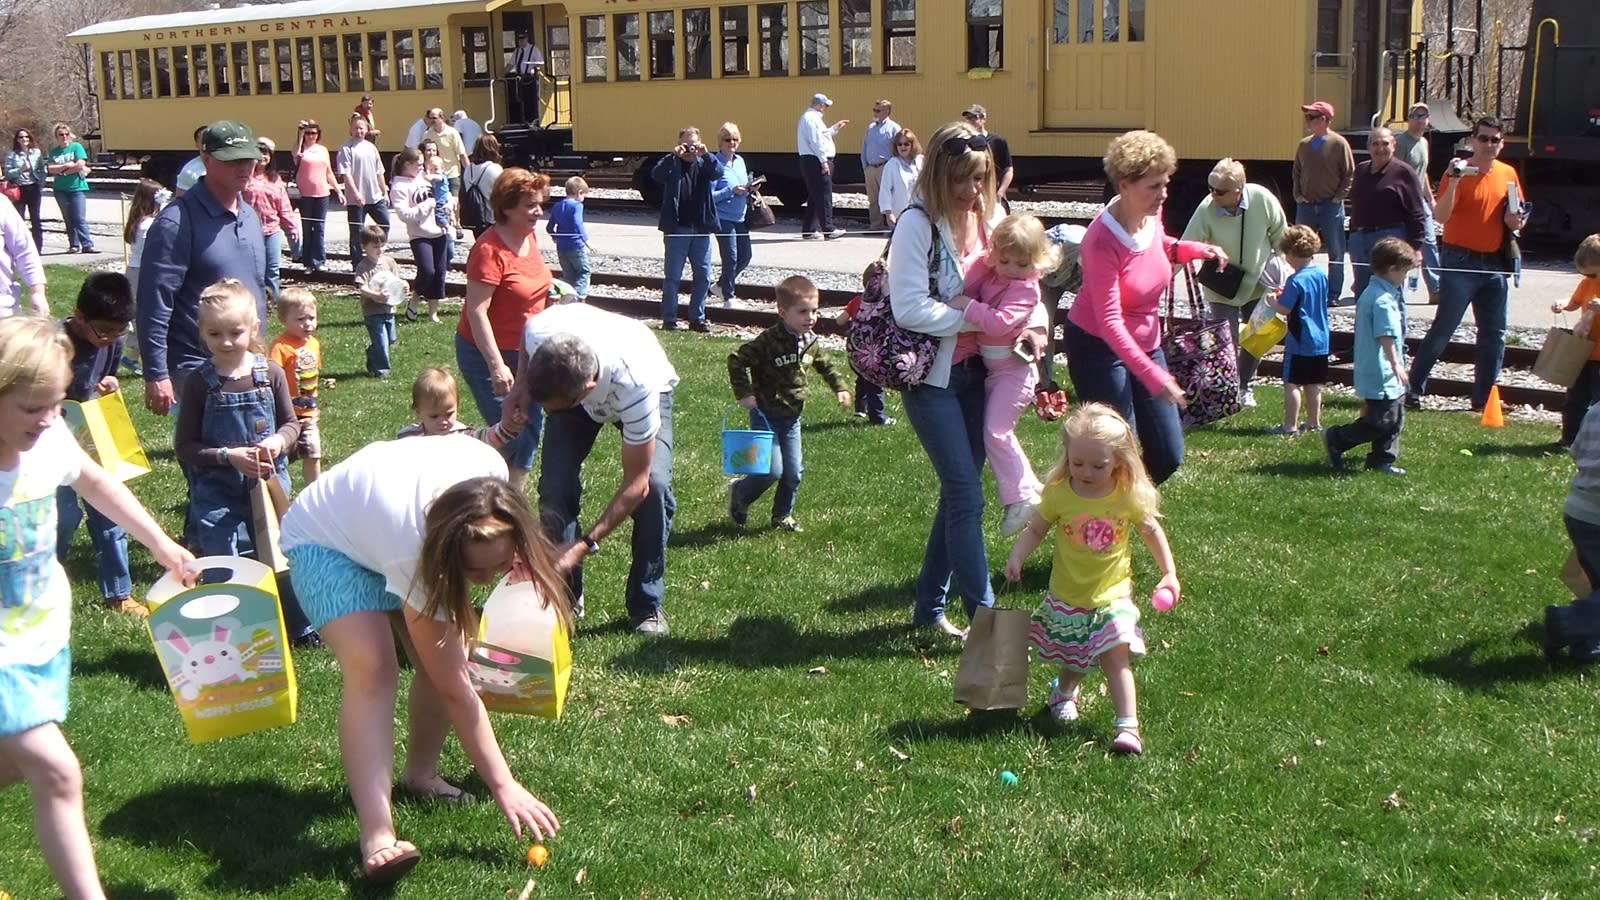 The Eggspecially Fun Bunny Run even includes an Easter egg hunt. Photo courtesy of Steam Into History.